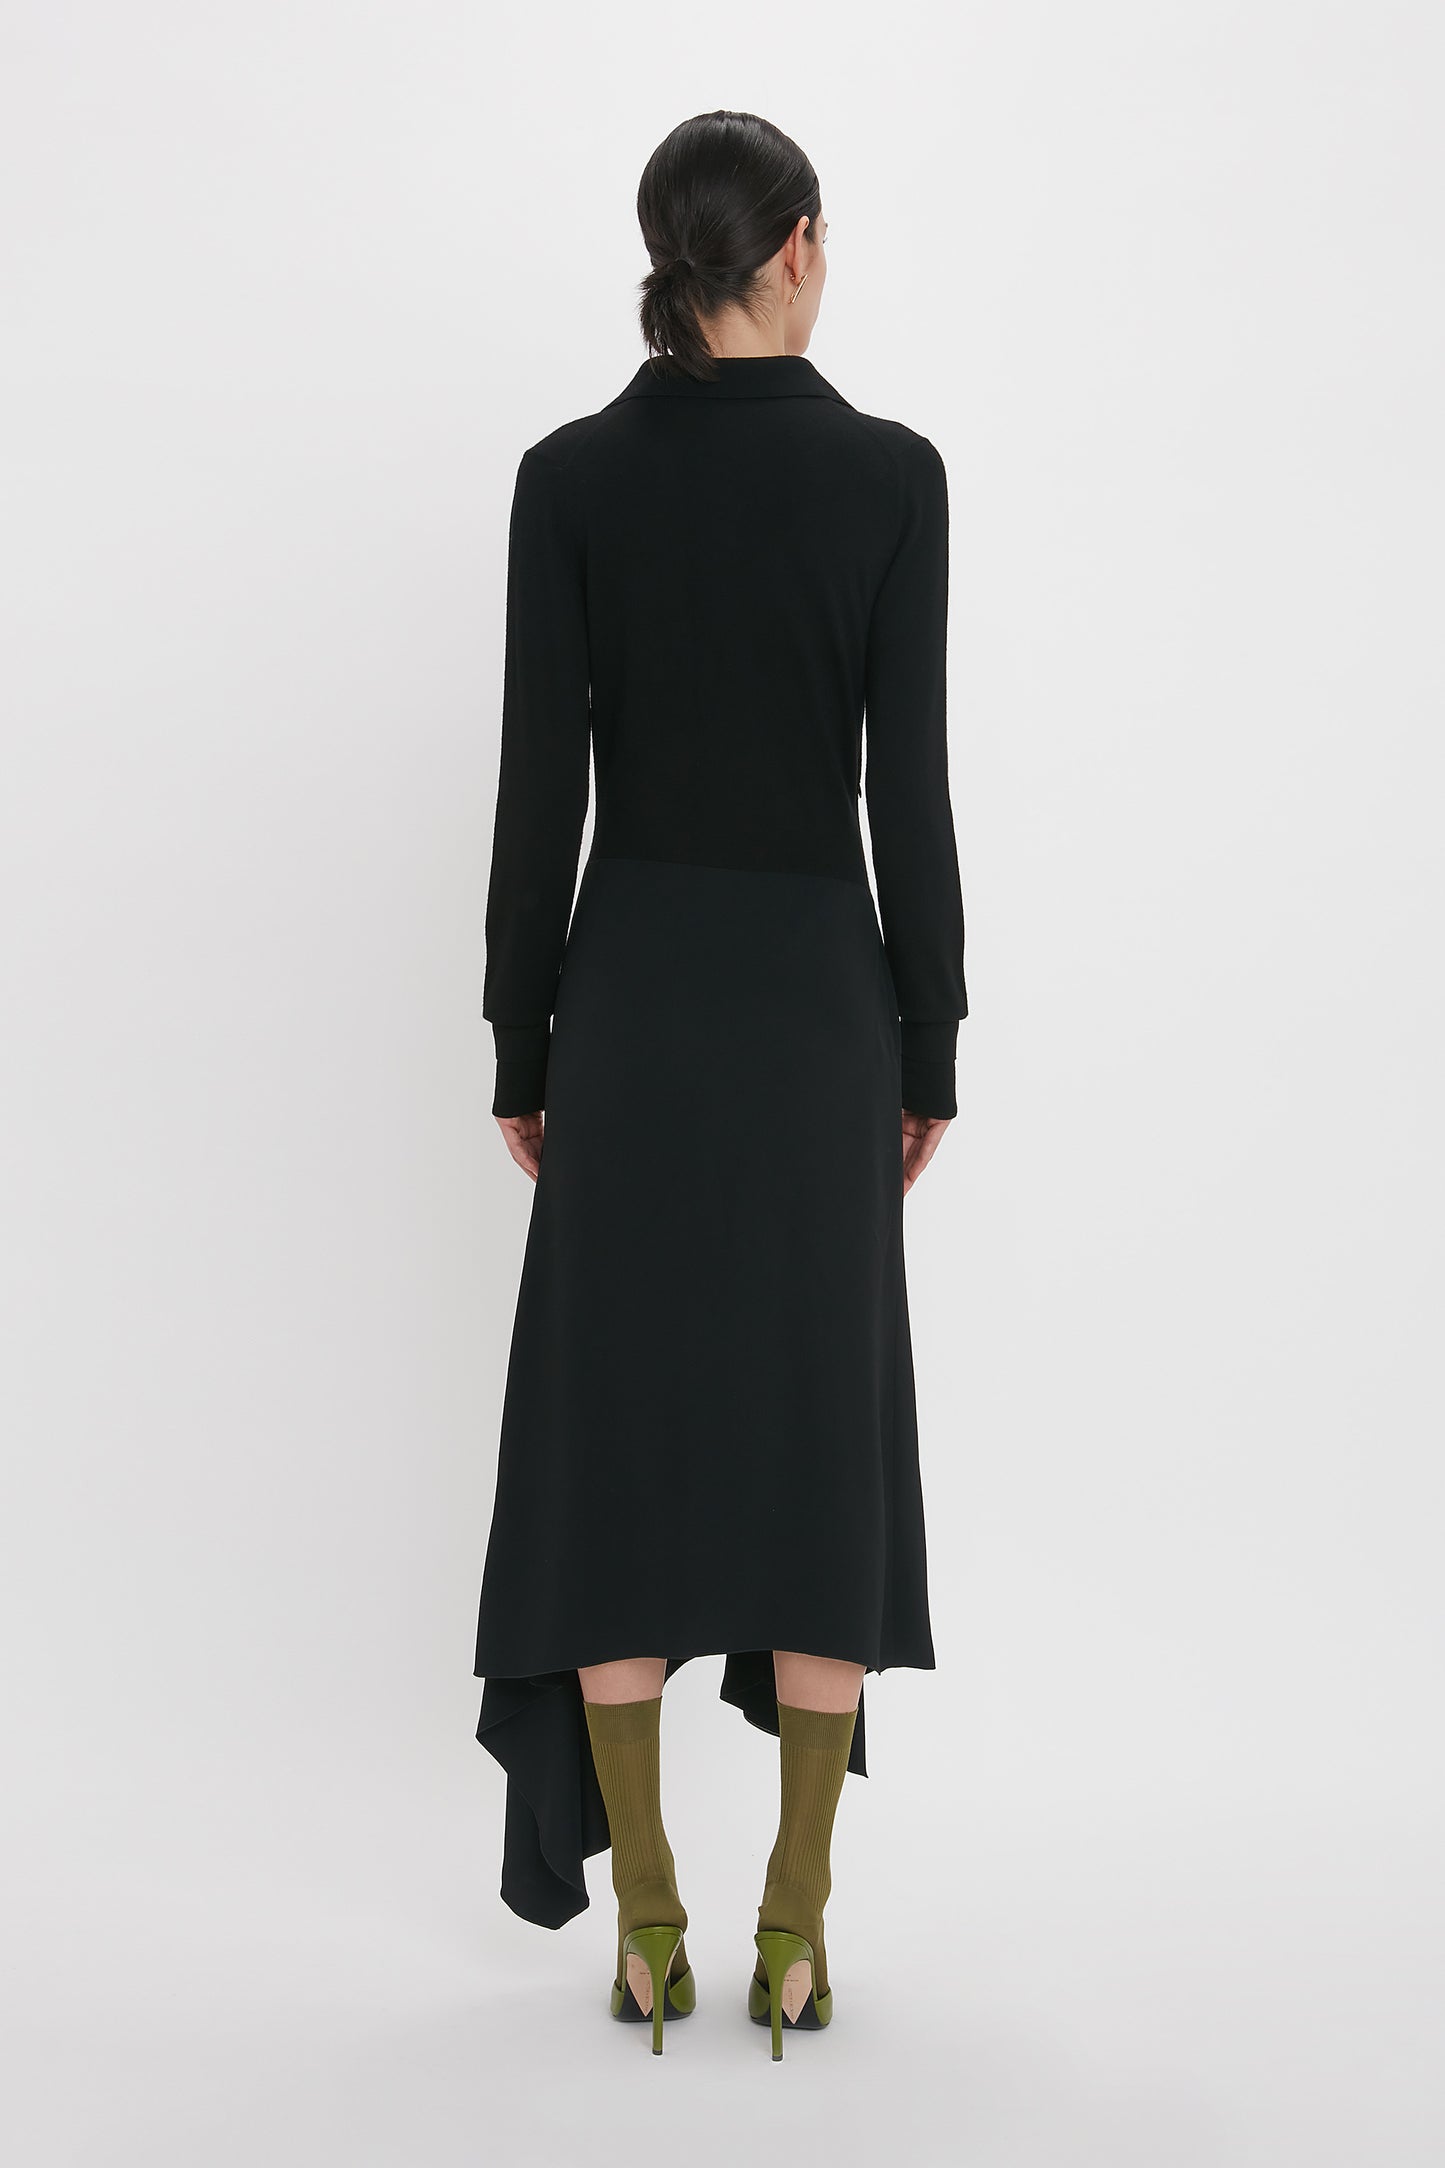 Person standing, facing away, wearing a Henley Shirt Dress In Black by Victoria Beckham with an asymmetric waist seam and green high-heeled shoes against a plain white background.